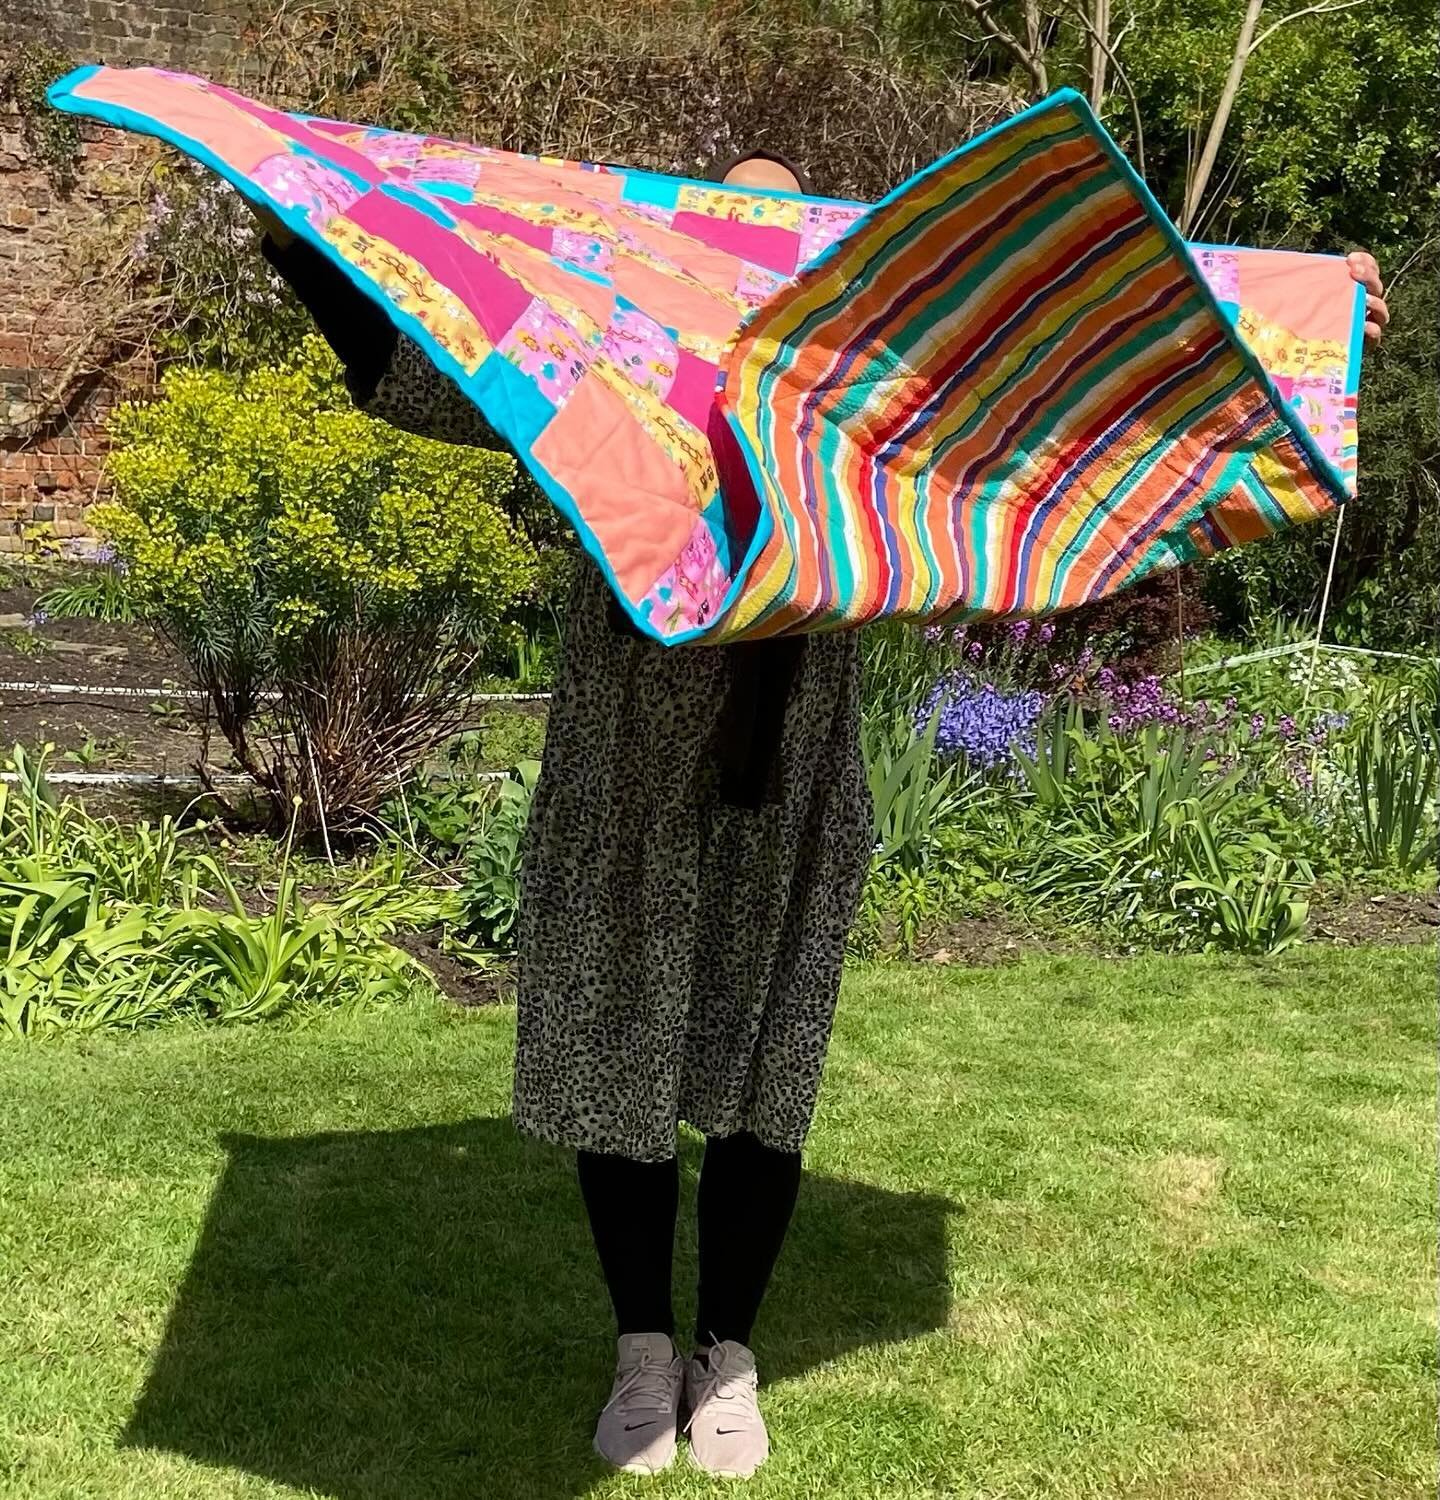 A lovely day in the garden and another &lsquo;first finish&rsquo; at the Quilt Academy. This one is flying off to Project Linus to brighten the day of a child in hospital. 

✂️🪡 🧵 🥰 ✂️🪡

#bellhouse #quiltingacademy #bellhousedulwich #dulwich 
#no